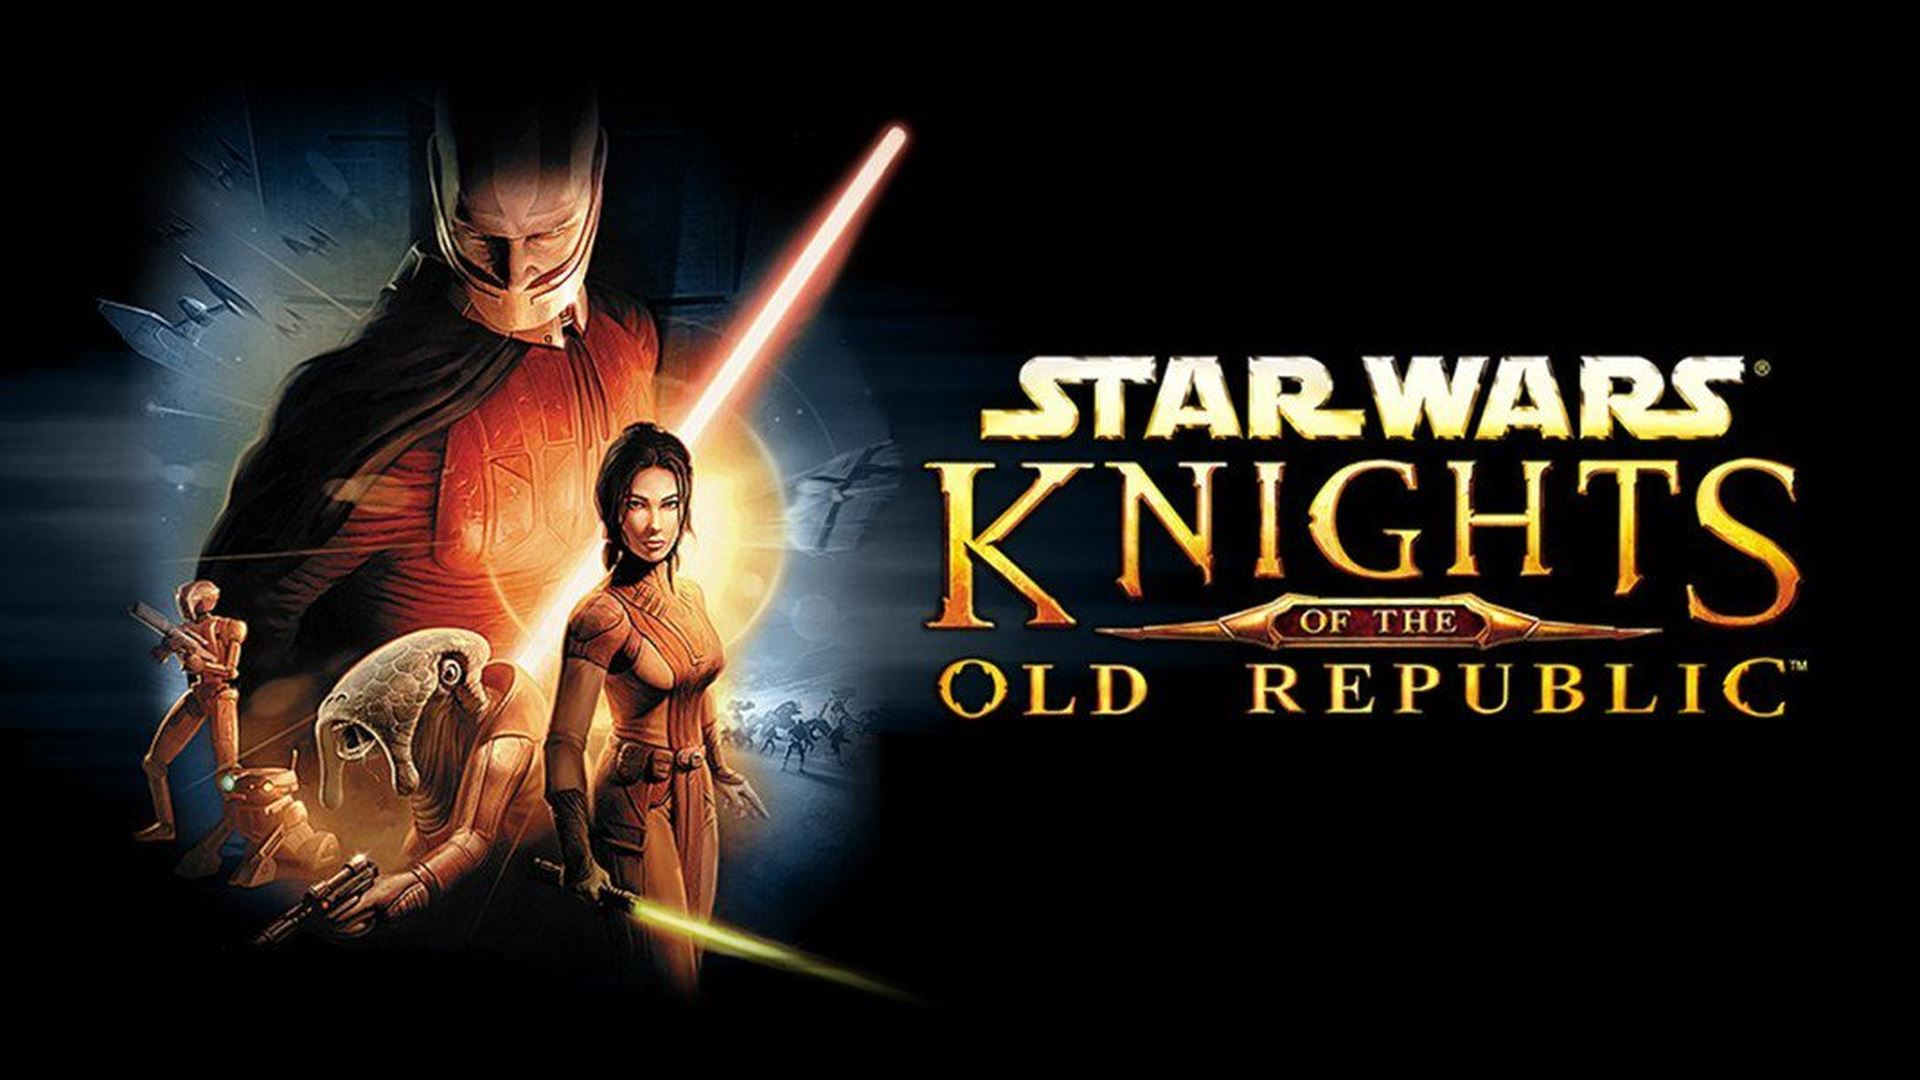 Star wars knight of the old republic 2 русификатор steam фото 8